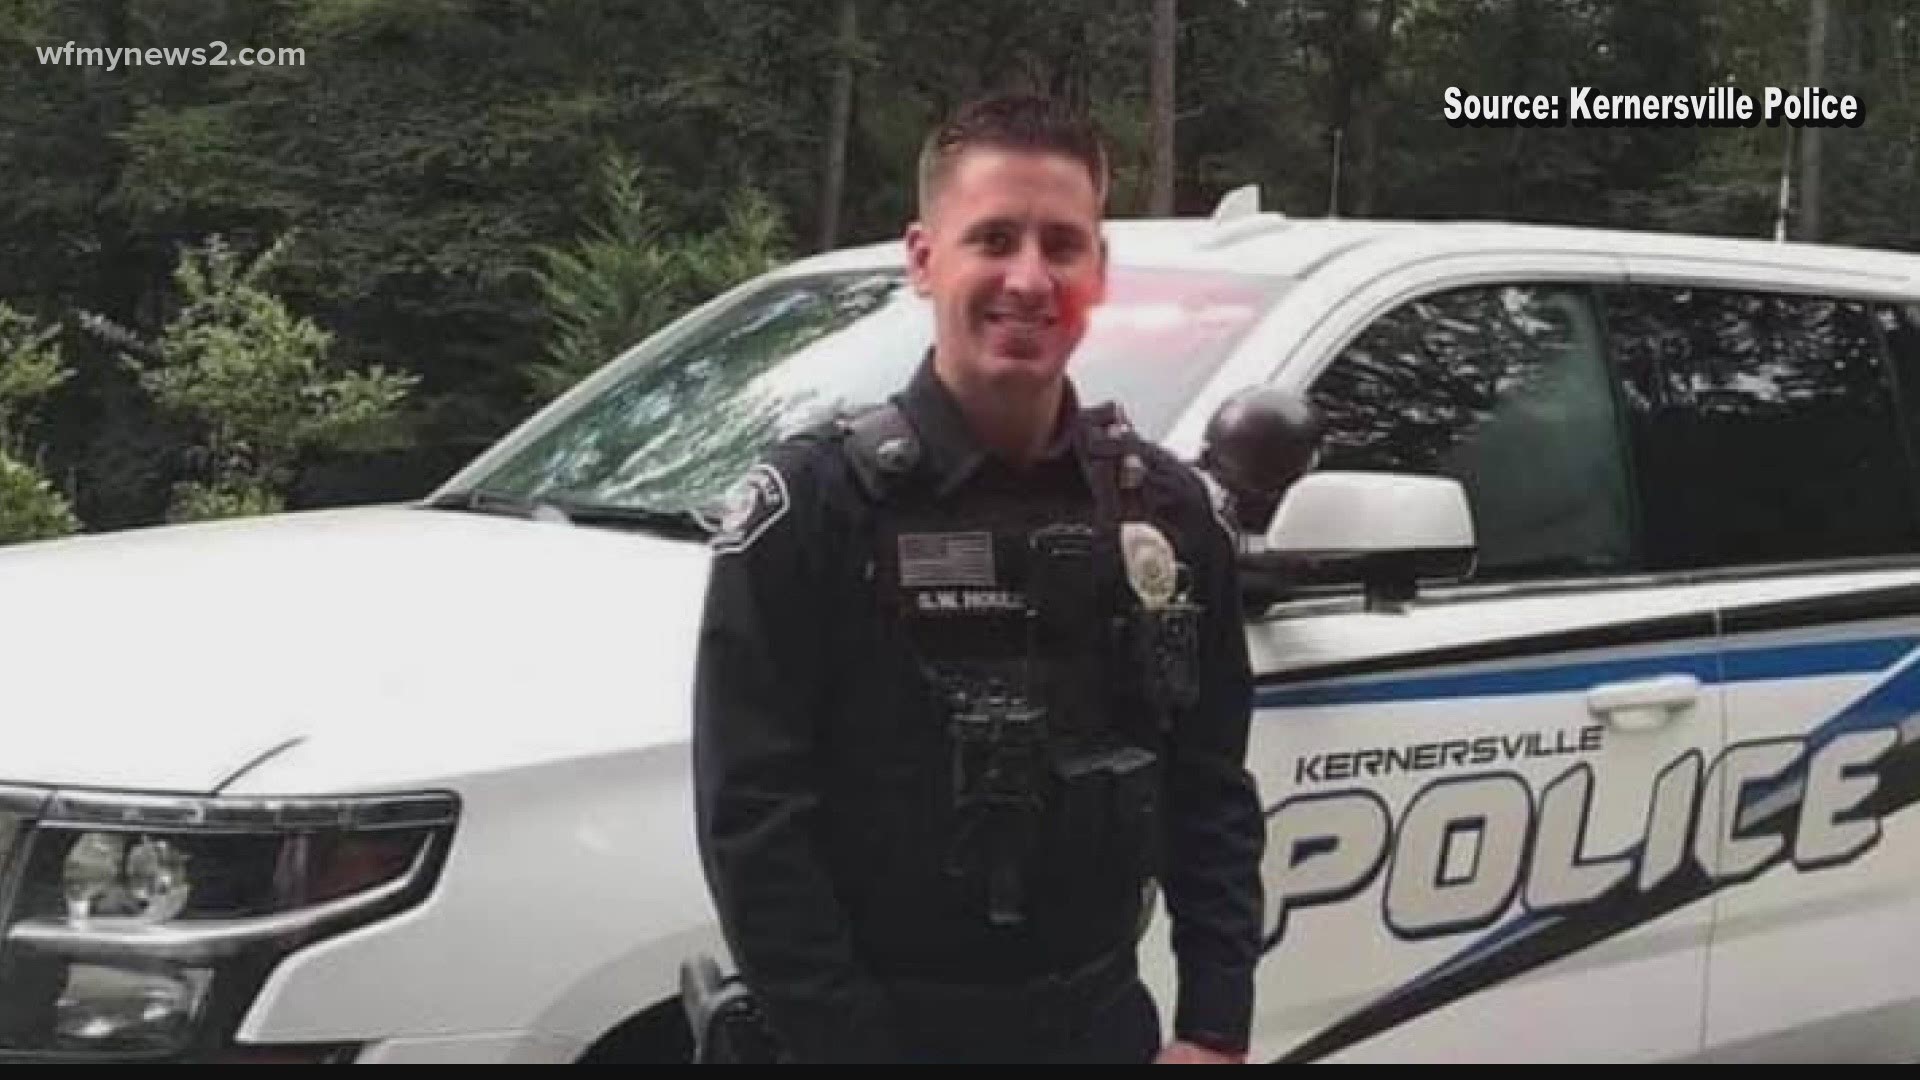 The Kernersville community is raising money to help pay for Officer Sean Houle’s medical expenses. The officer is recovering after he was shot in the line of duty.